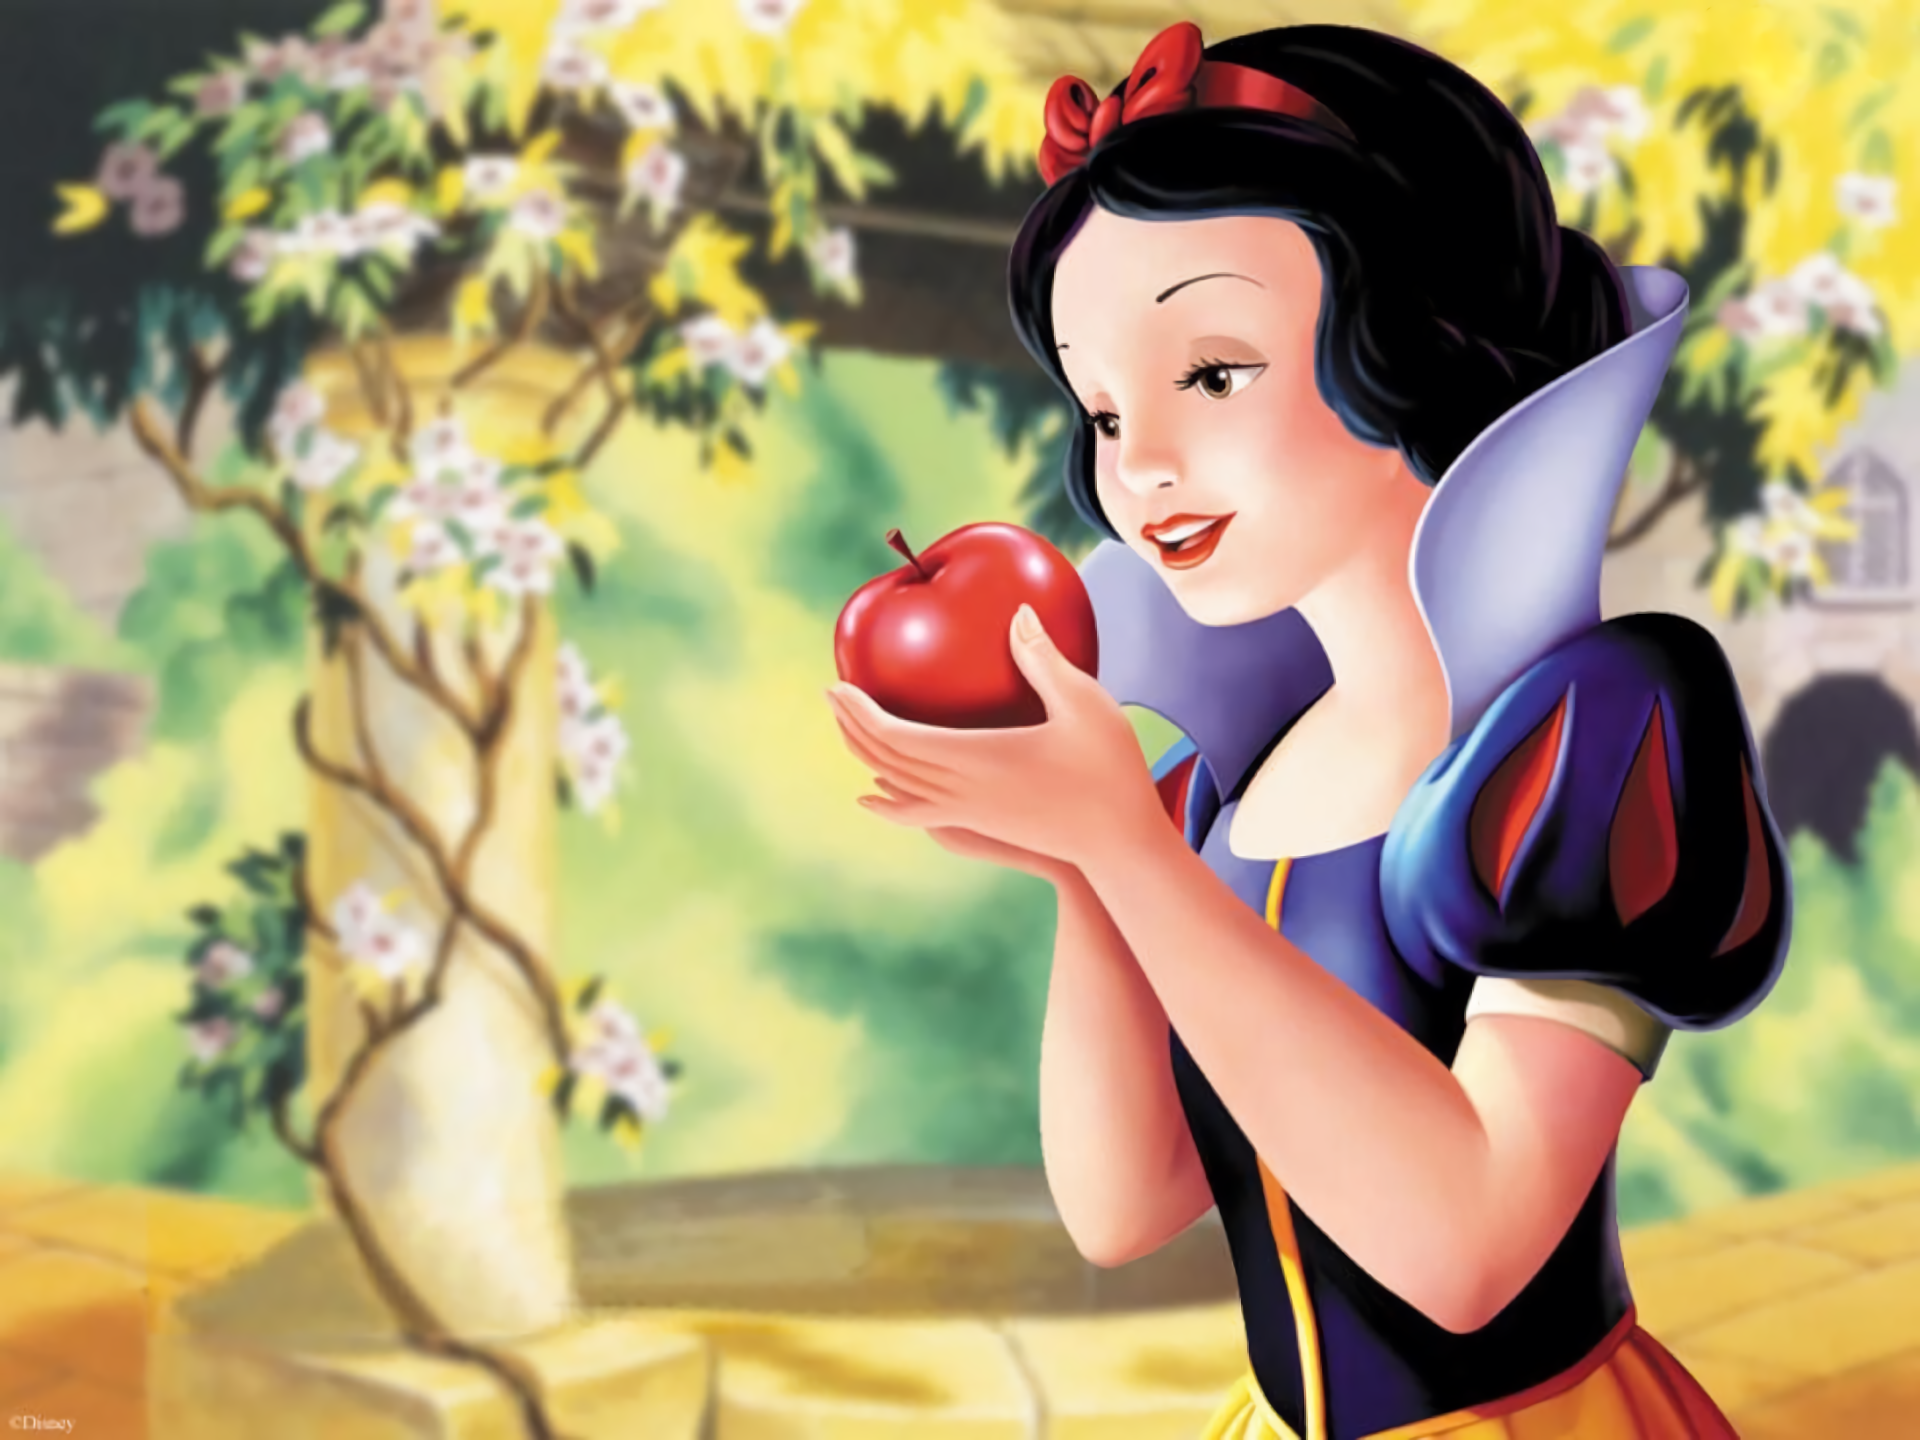 Snow White sitting in a picturesque winter landscape